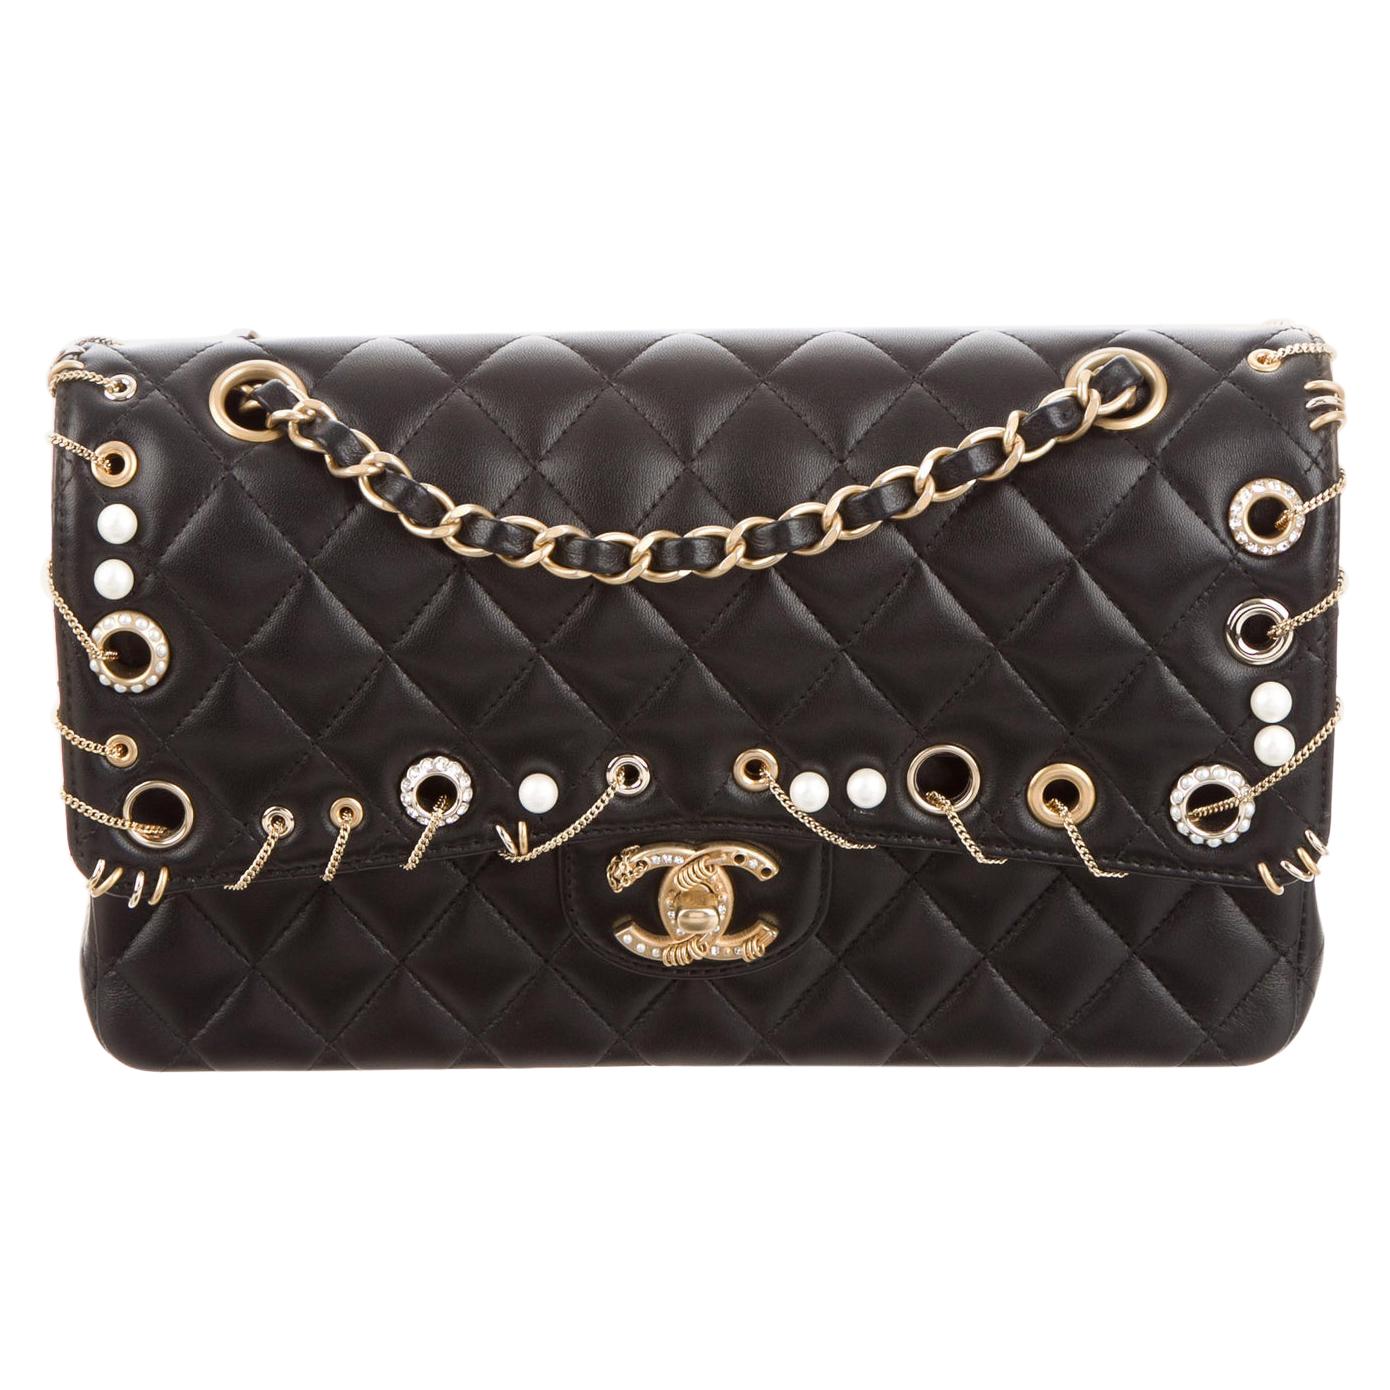 Chanel NEW Black Leather Gold Charm Chain Pearl Shoulder Flap Bag in Box 